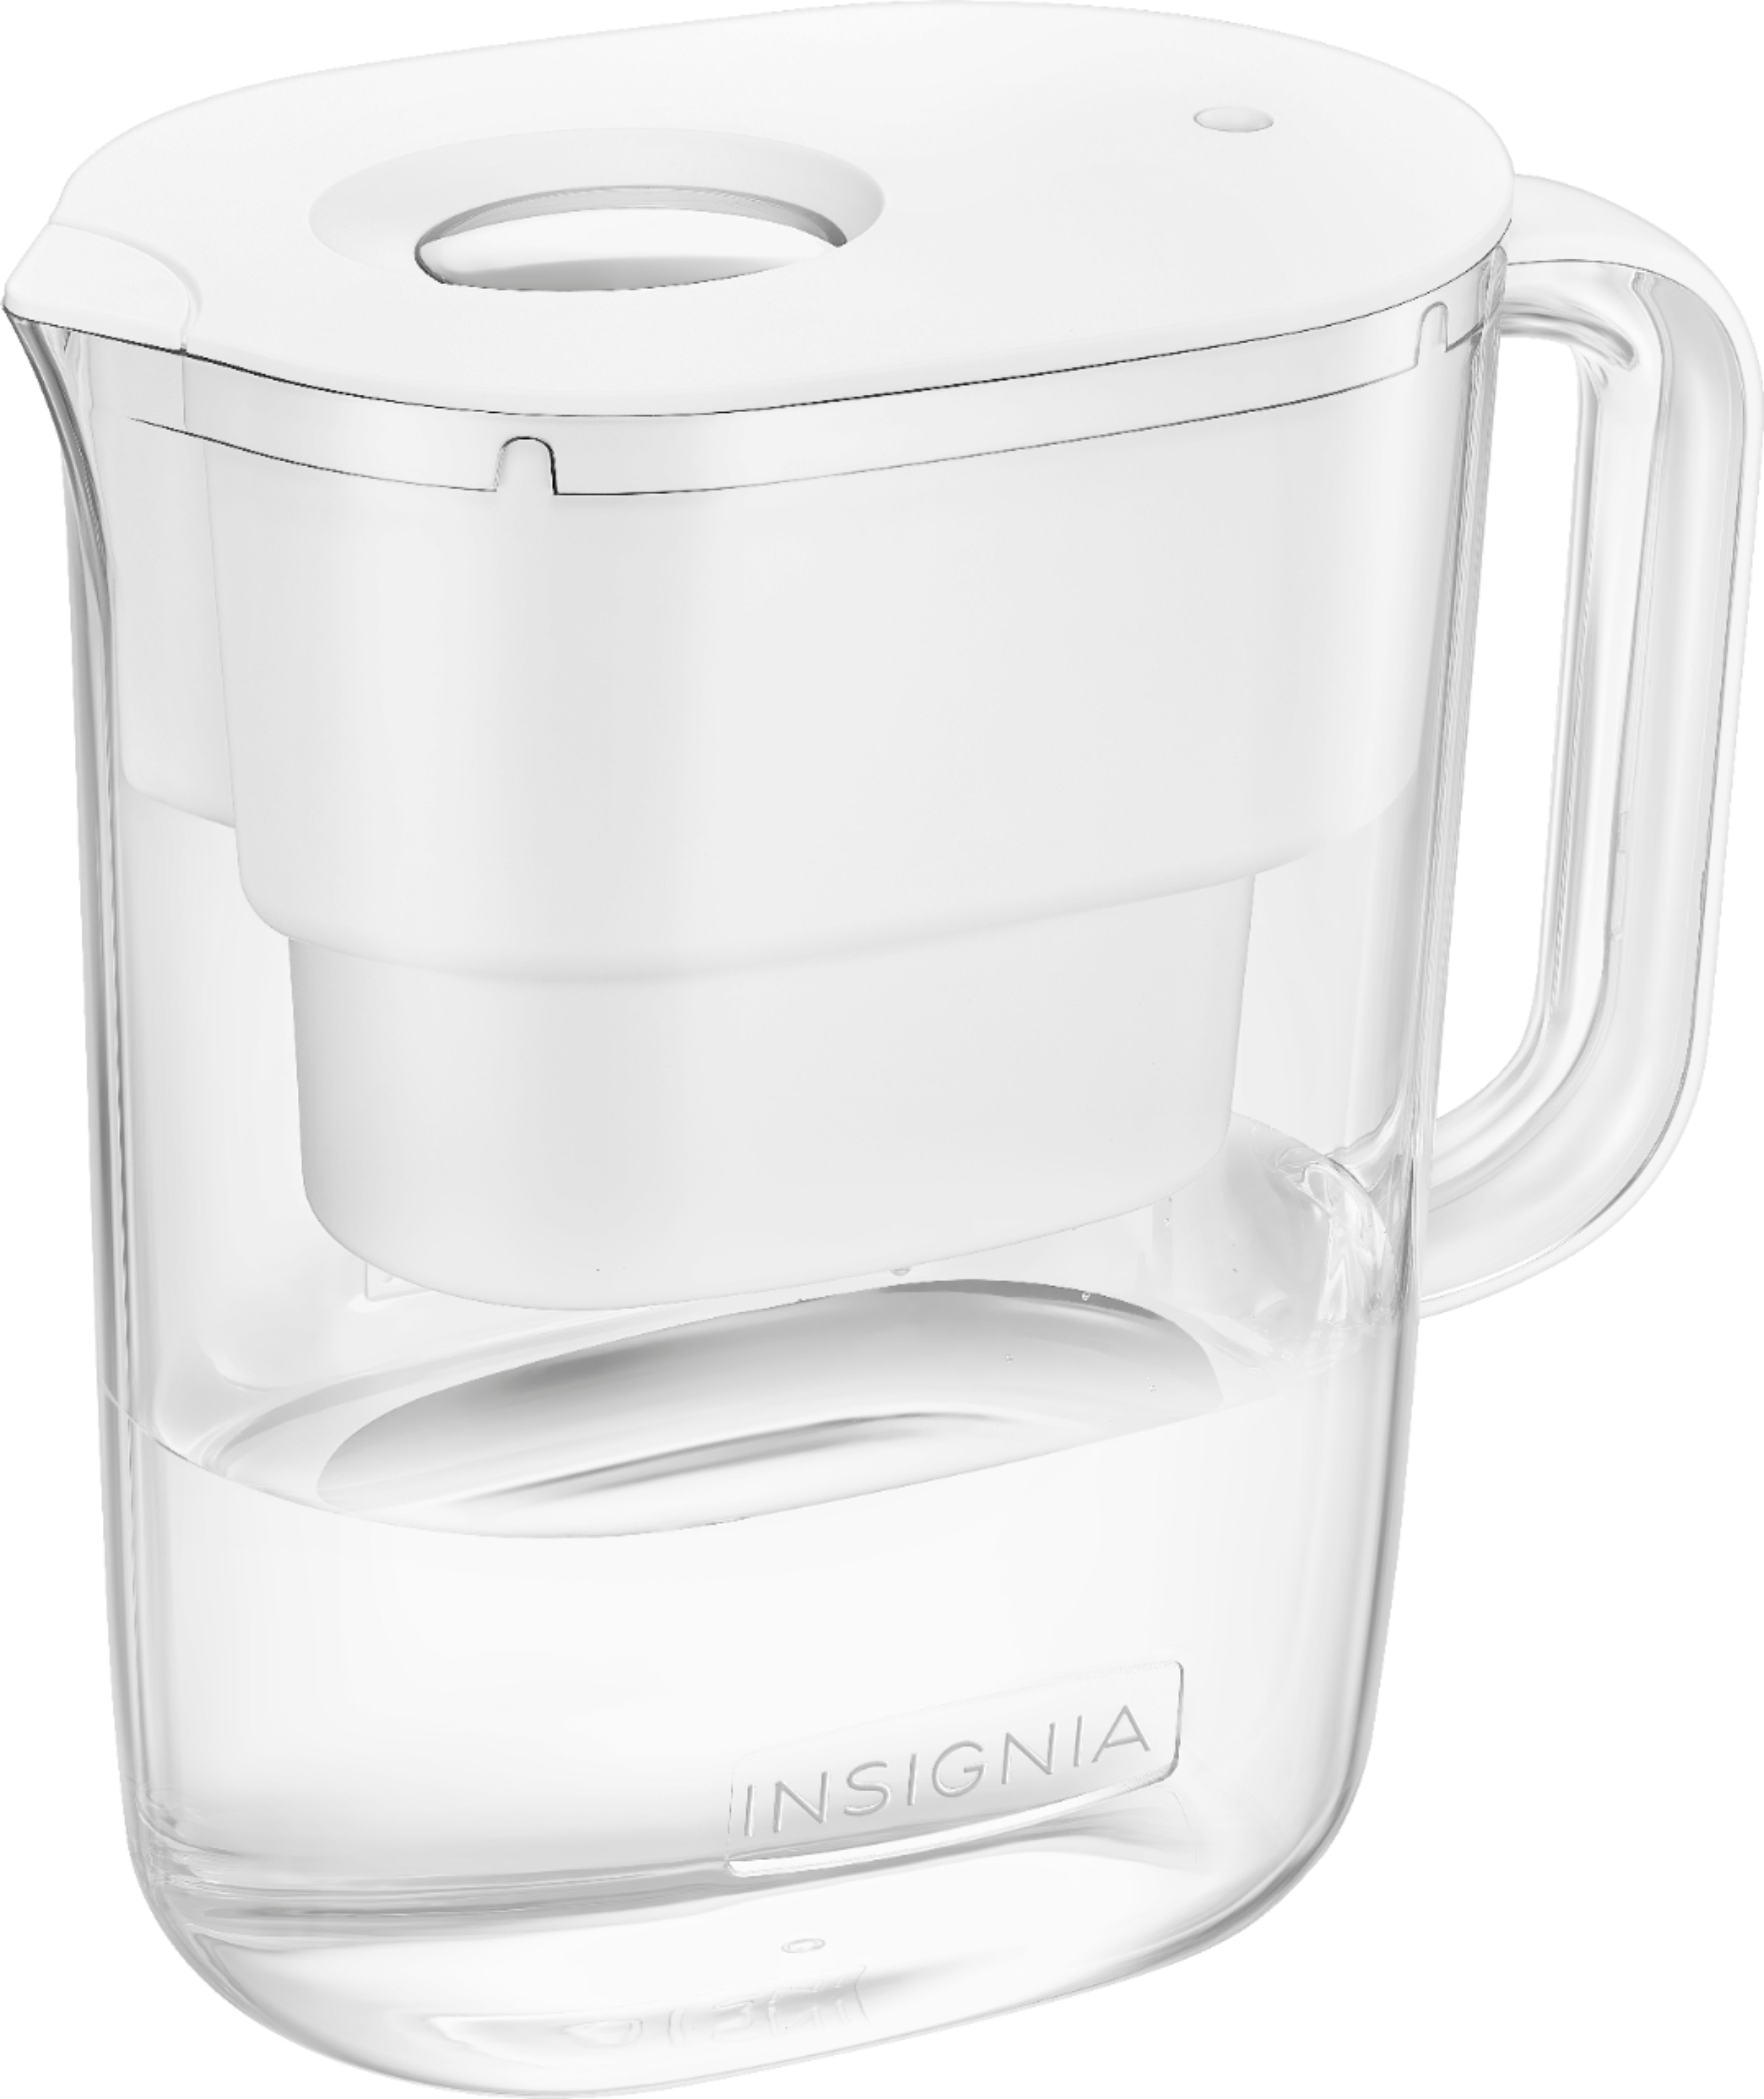 Uses of Glass Water Pitcher. A glass water pitcher is a handy and